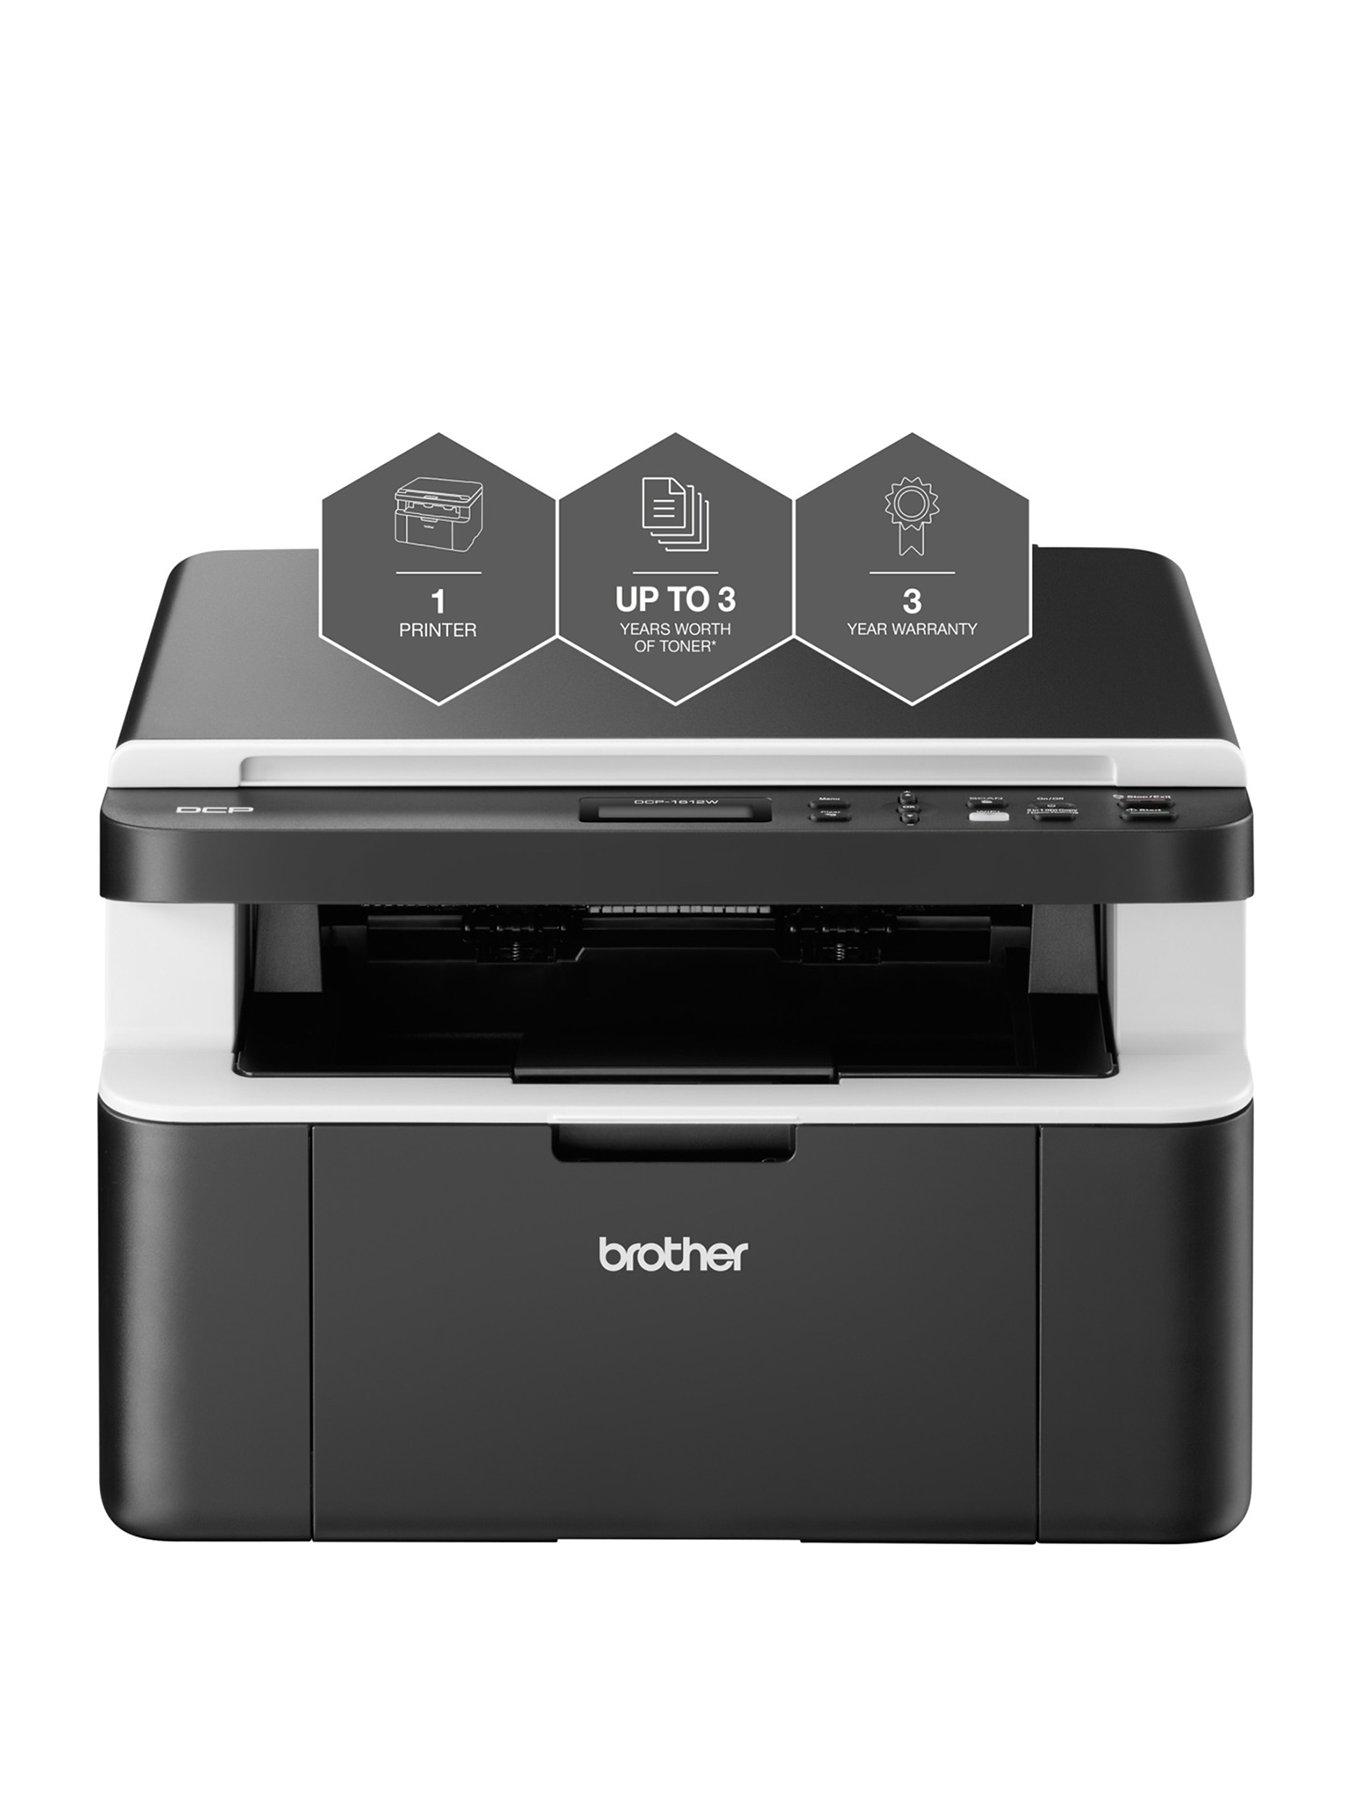 Brother DCP-1612W All in Box Bundle - Compact, Wireless, Mono Laser A4  Printer/Scanner/Copier, with 3-Year Warranty, Up To 3 Years' Worth Of  Printing